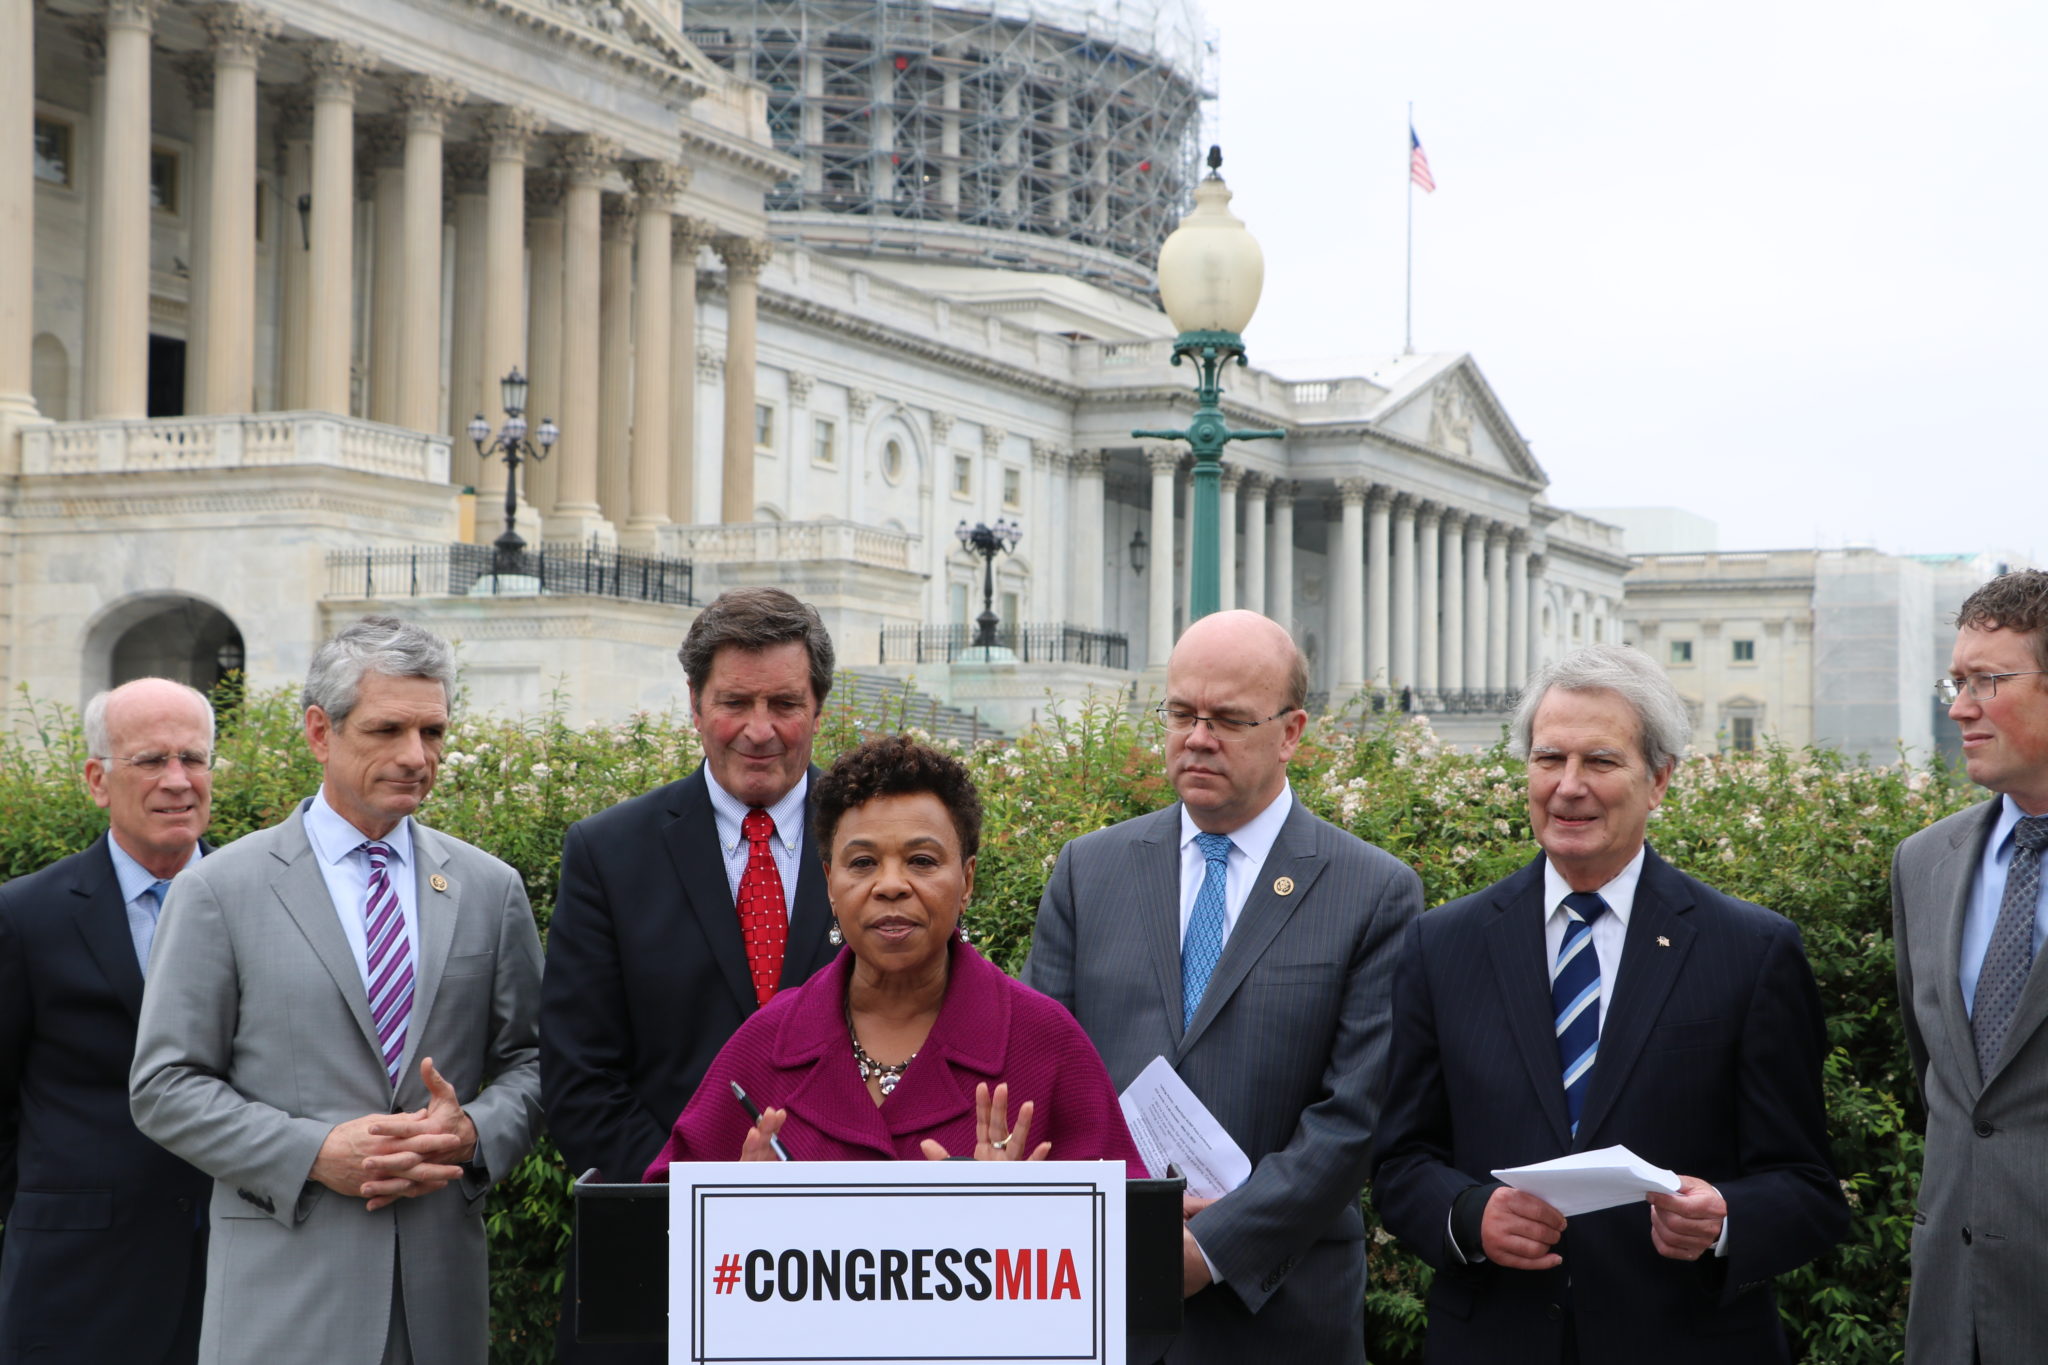 Rep. Barbara Lee (D-Calif.) joins her colleagues at a bi-partisan press conference in May calling on Congress to repeal and pass a new authorization to use military force.